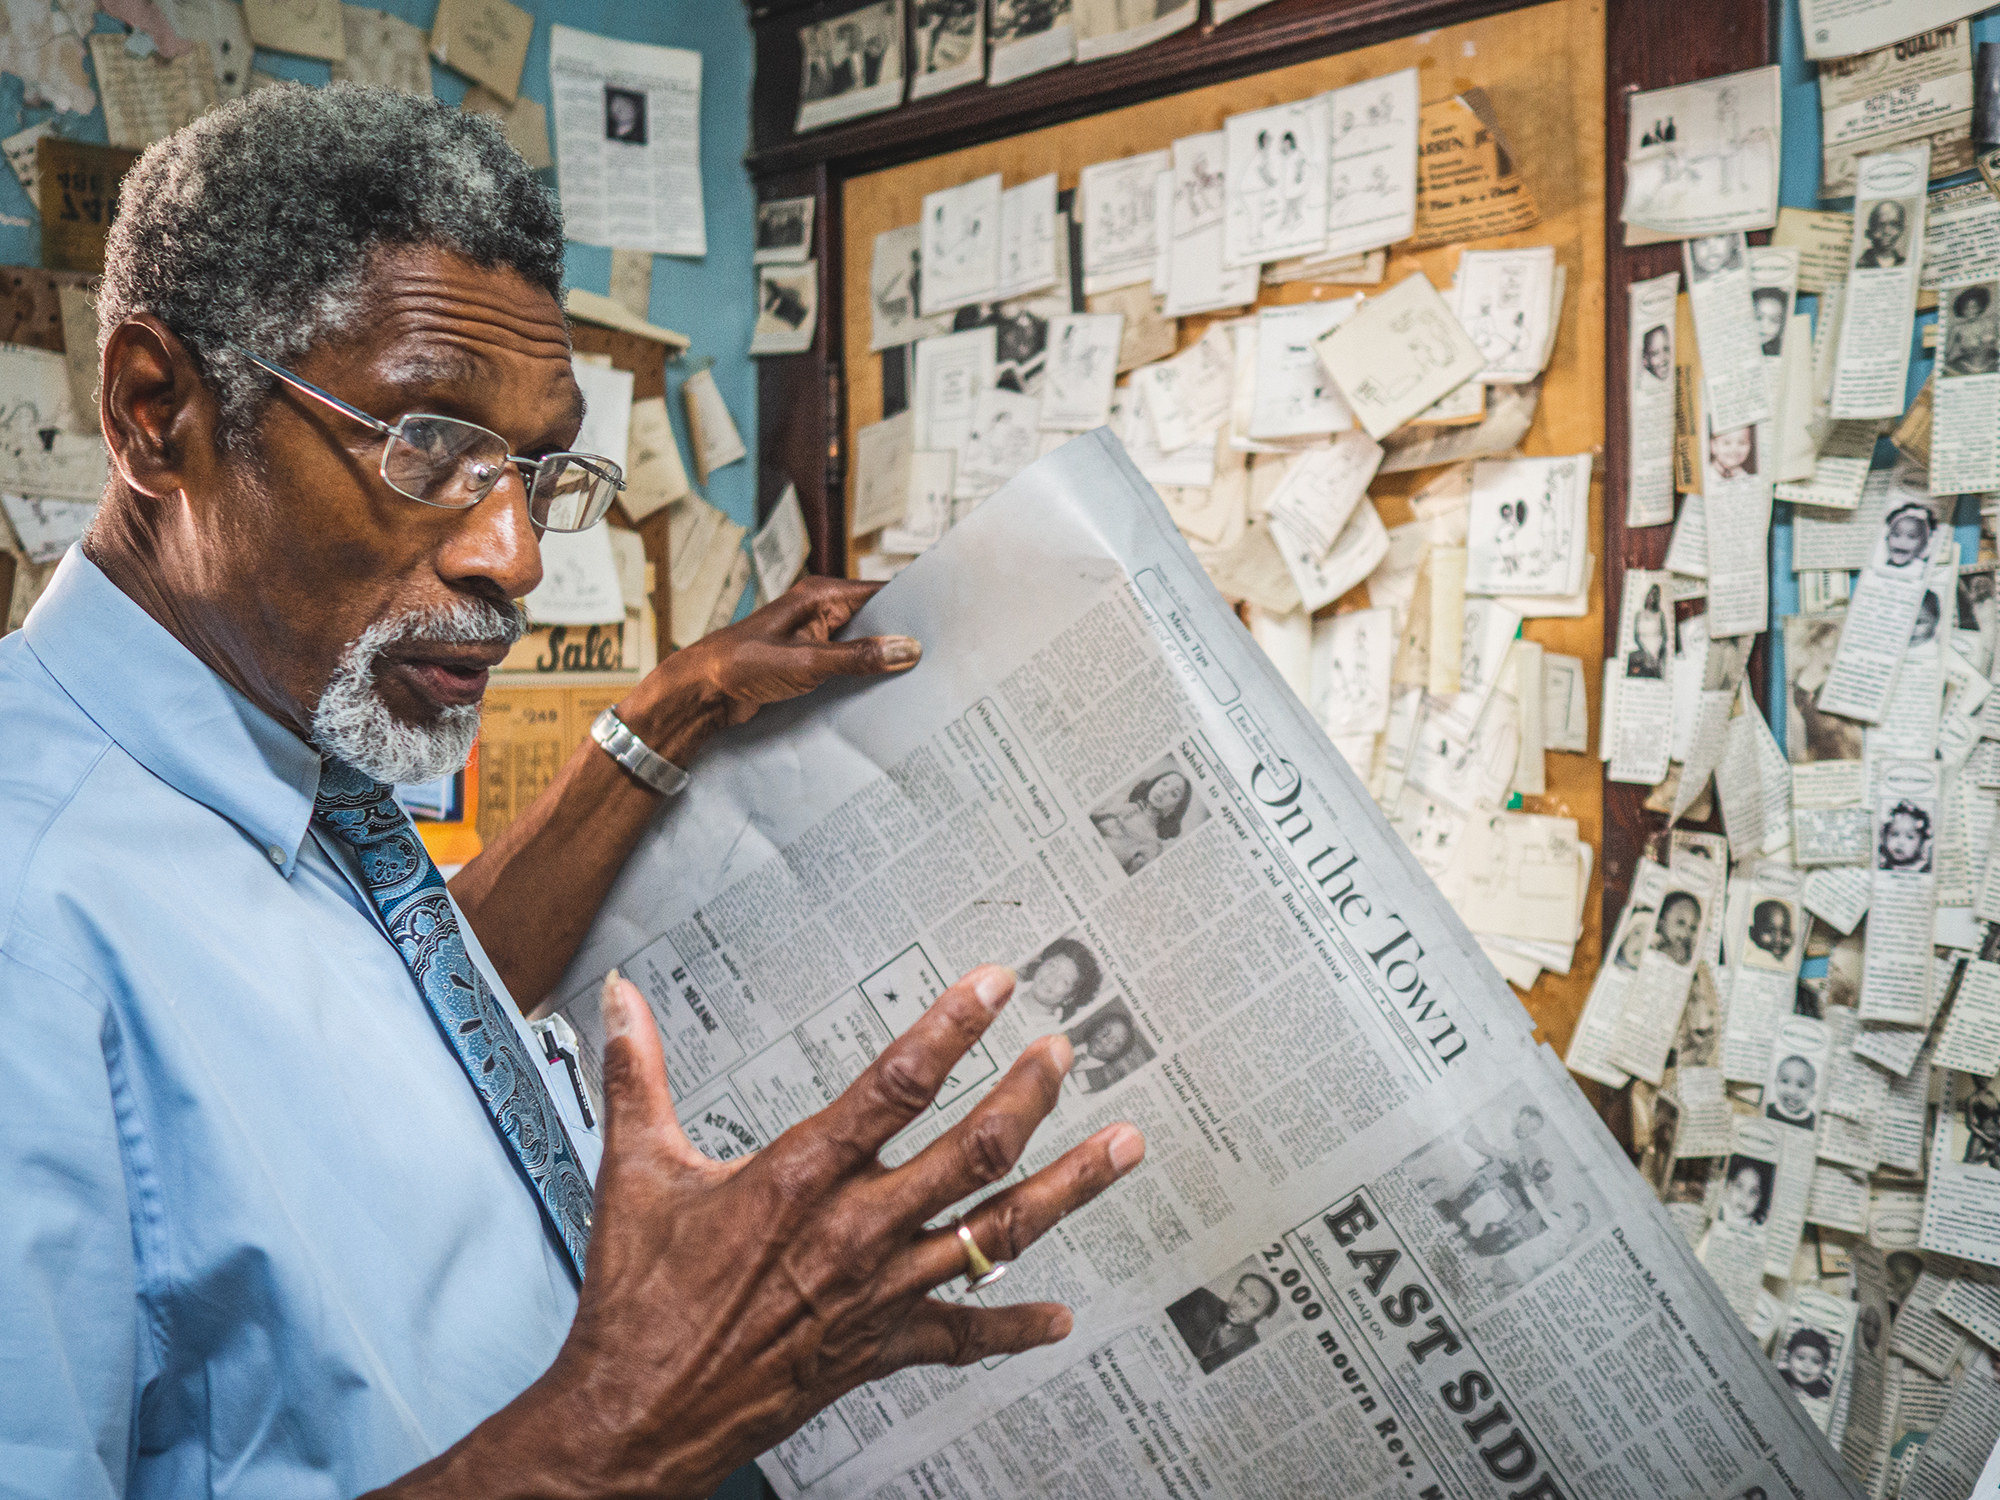 A man holds a newspaper in front of a wall filled with notes